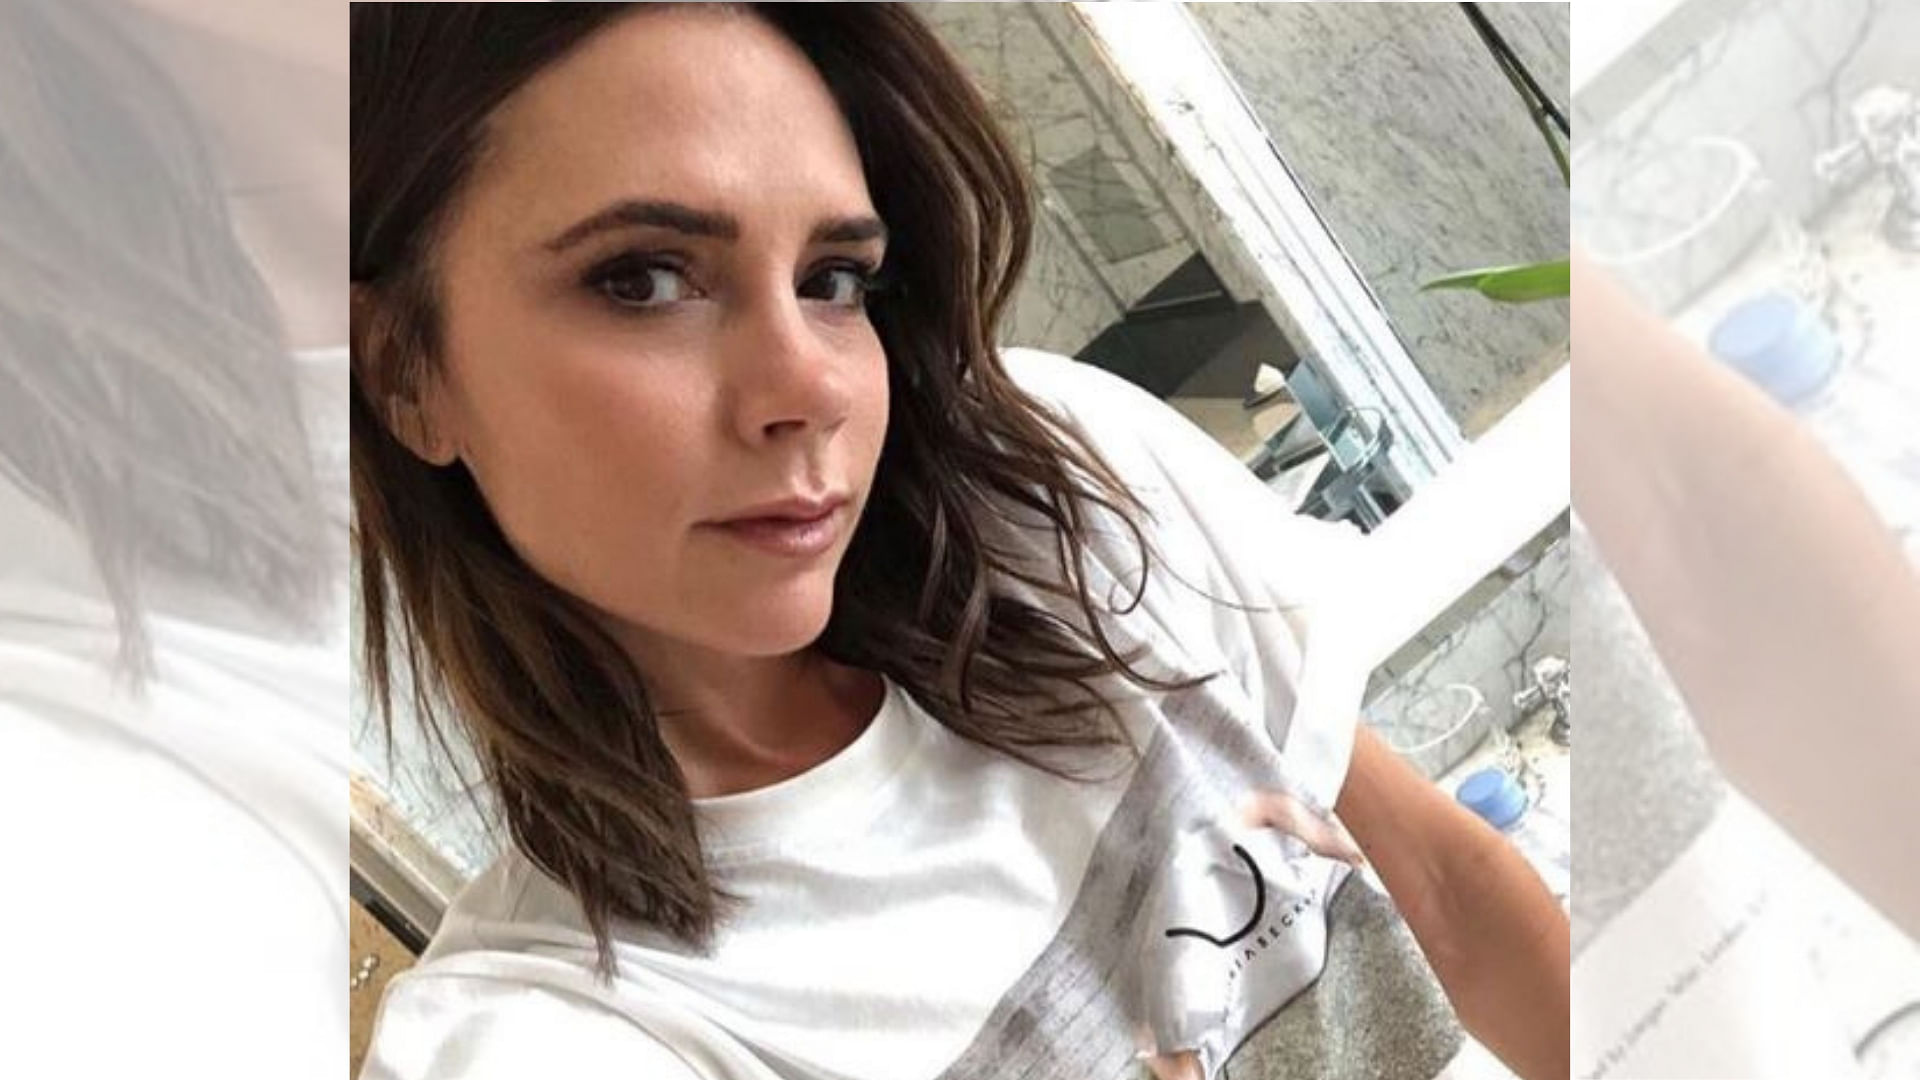 Fashion designer Victoria Beckham has spent 1,200 pounds on a new moisturiser. It’s made from her own blood.